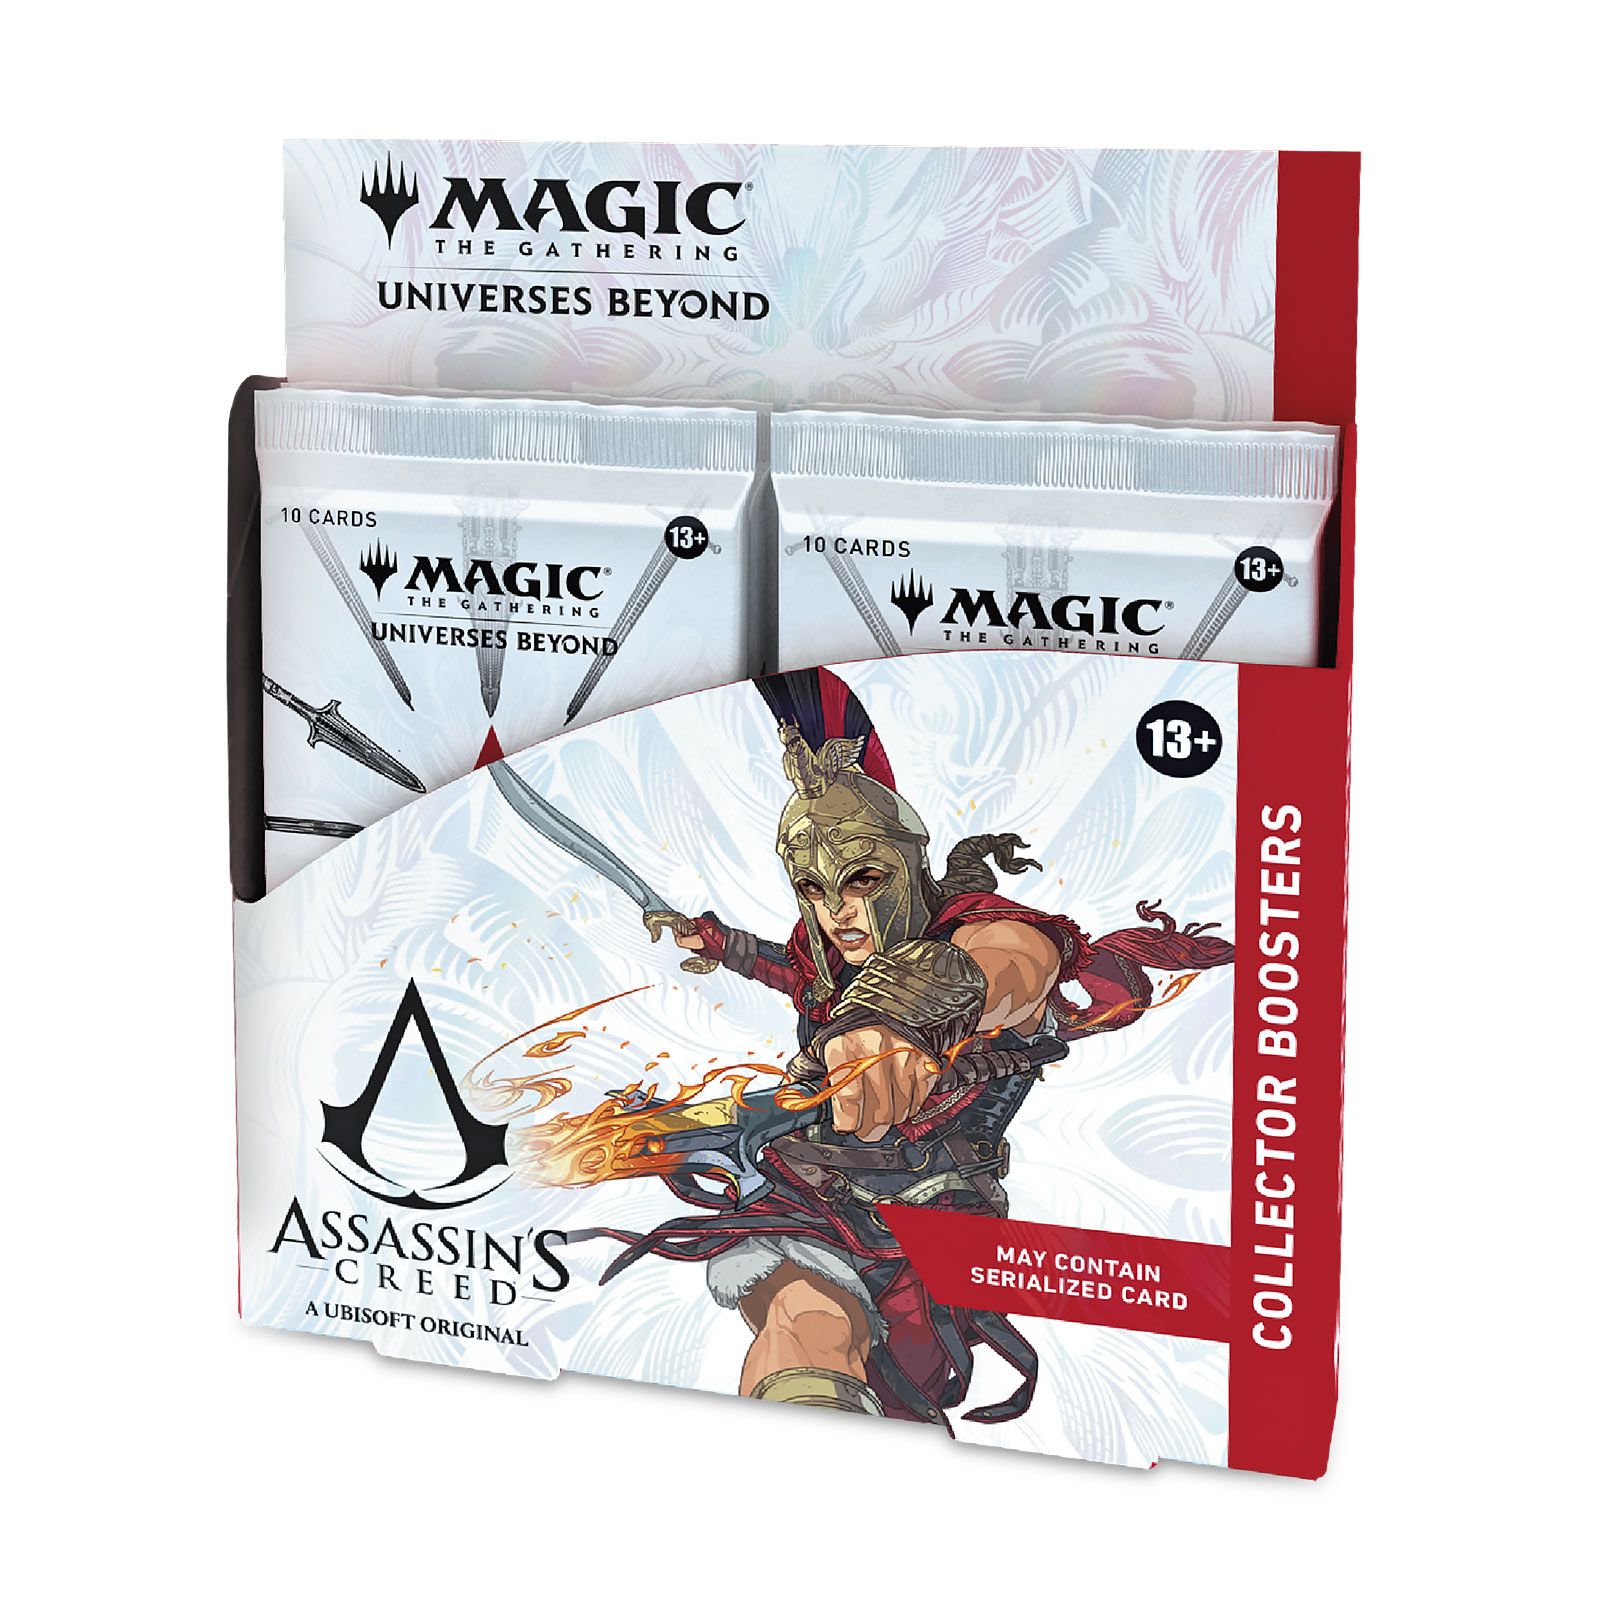 Assassin's Creed Collector Booster Display English Version - Magic The Gathering